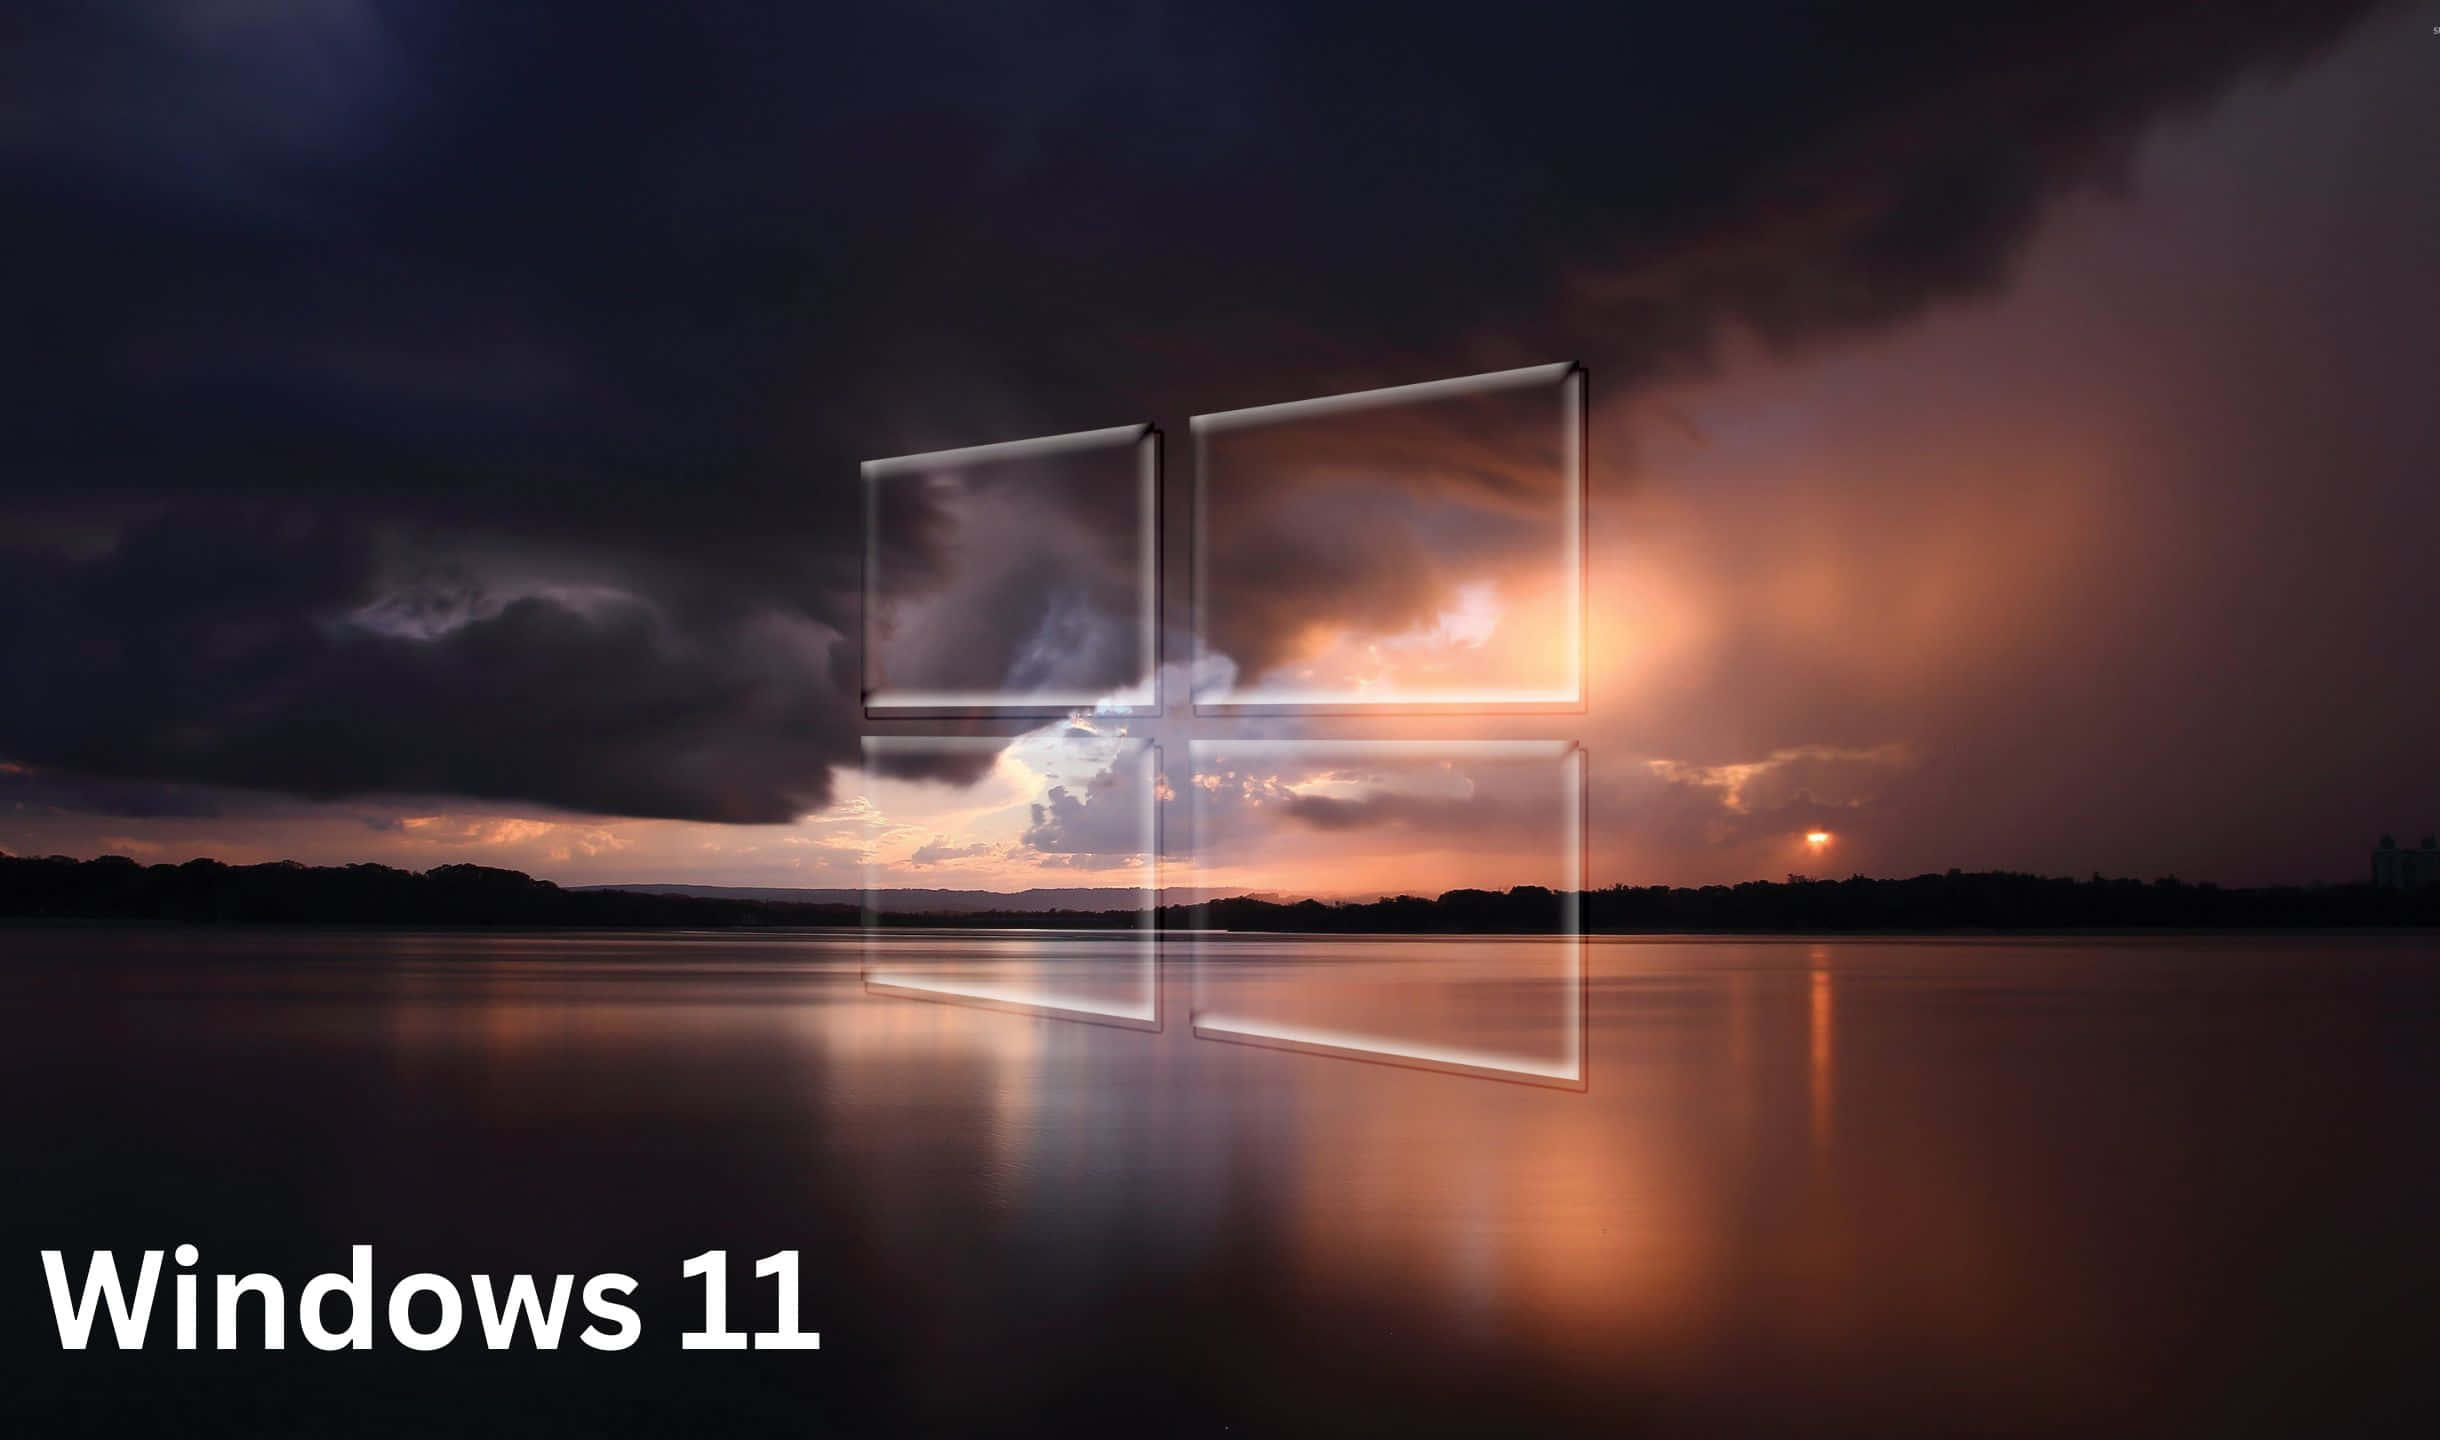 Intuitive And Innovative Windows 11